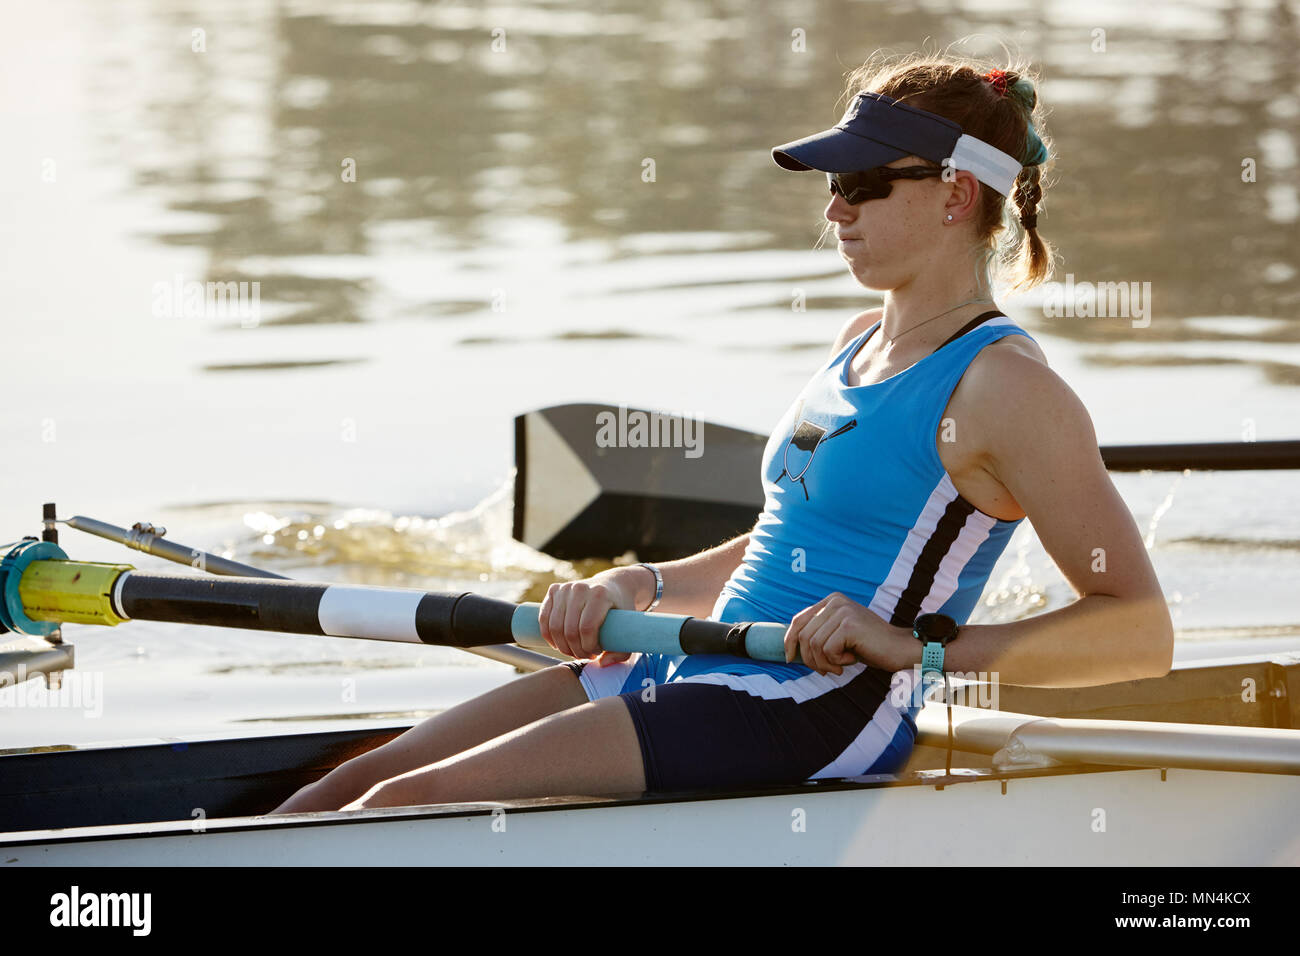 Determined female rower rowing scull Stock Photo